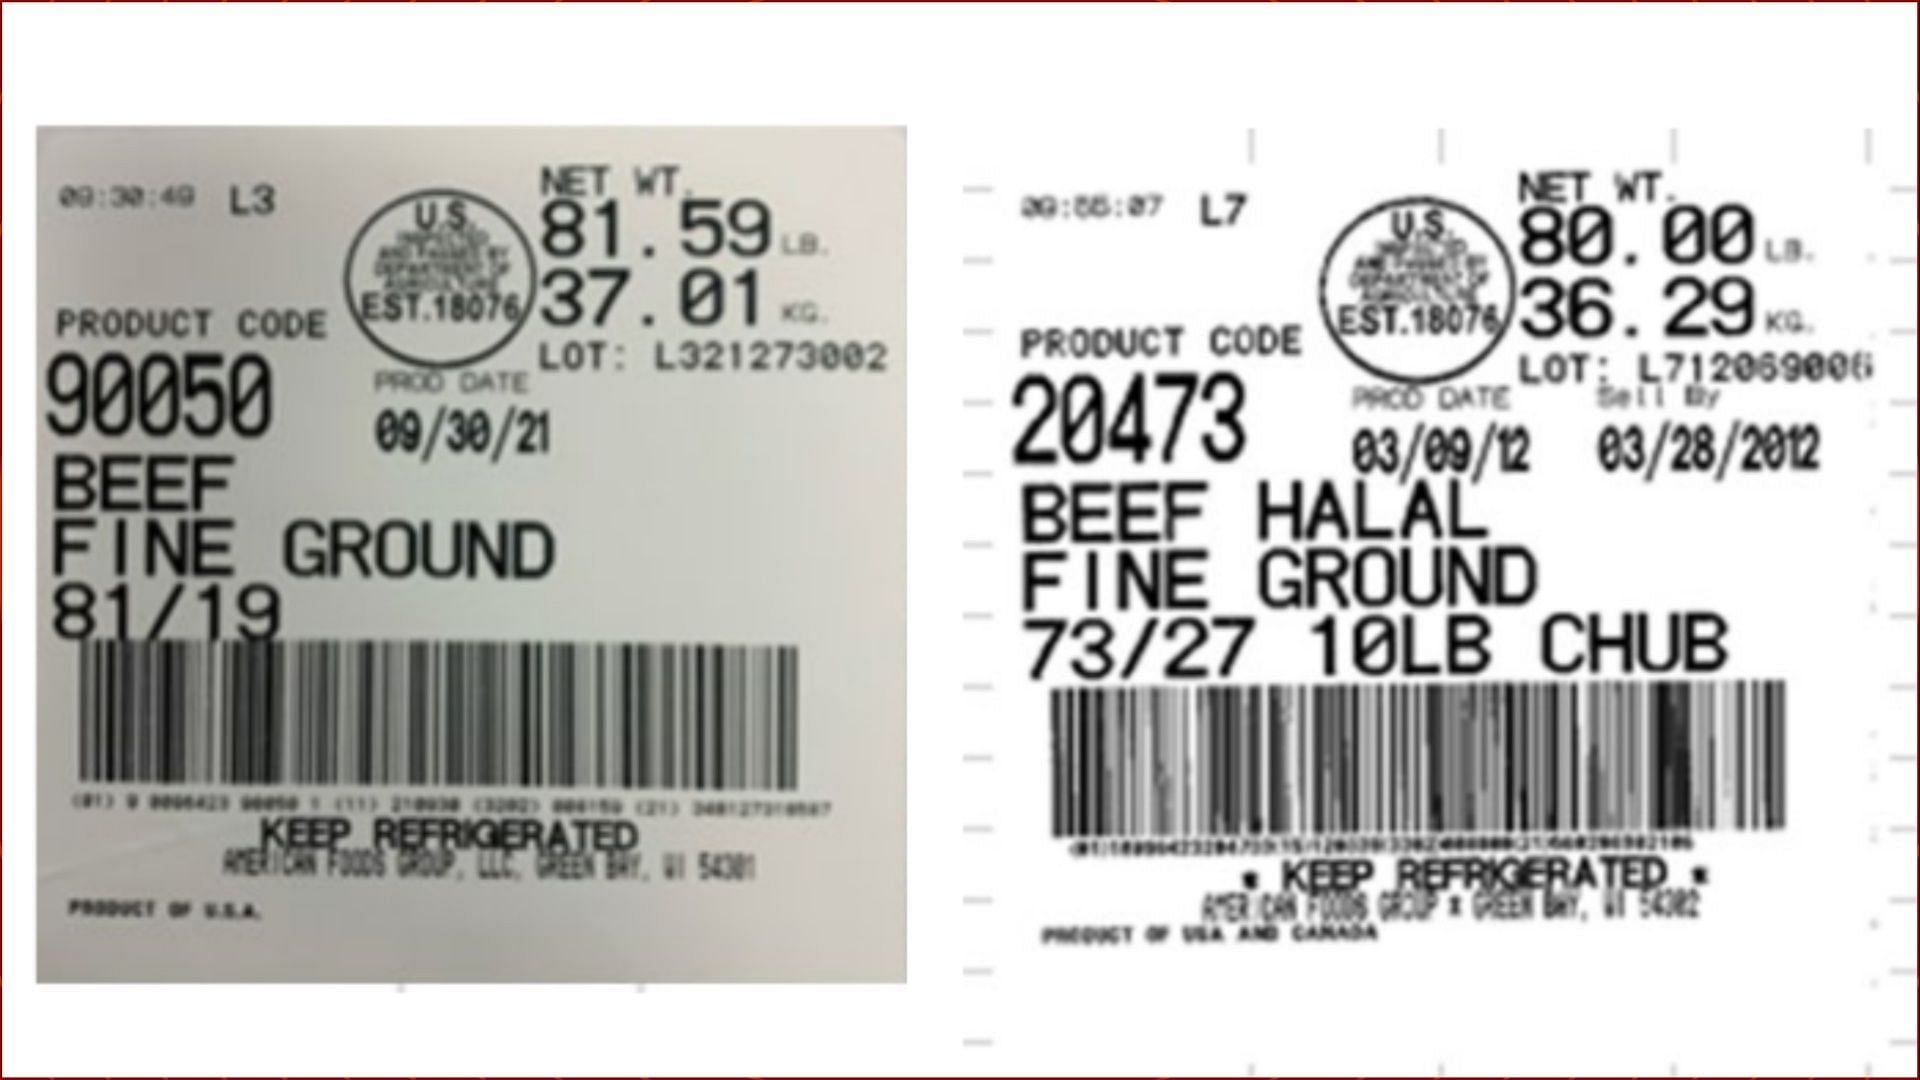 The recalled Ground meat products should not be consumed any longer (Image via Food Safety &amp; Inspection Service)